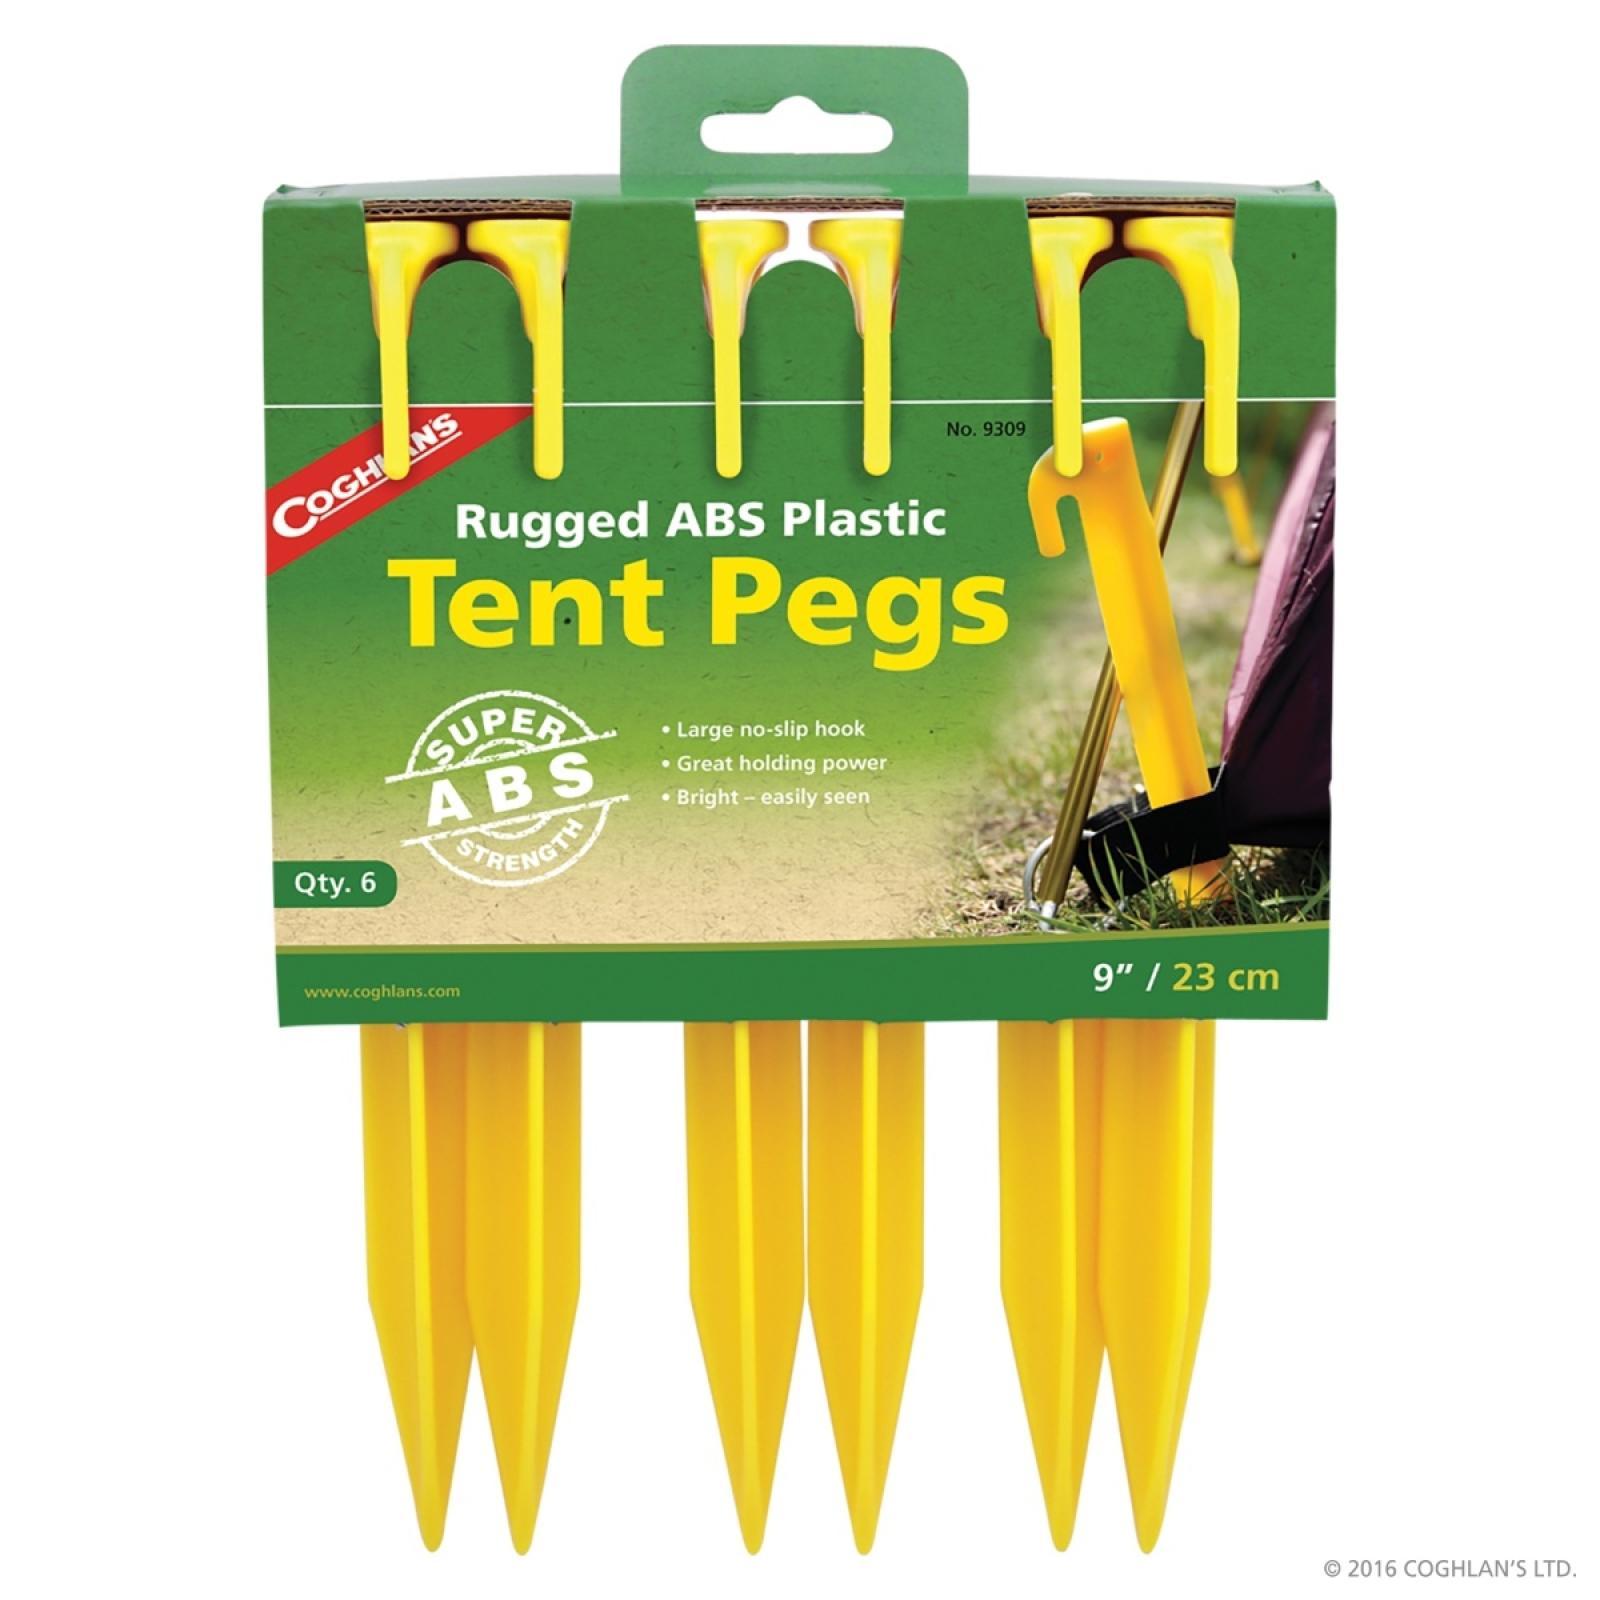 Coghlan ABS Tent Pegs 9" 6 Pack